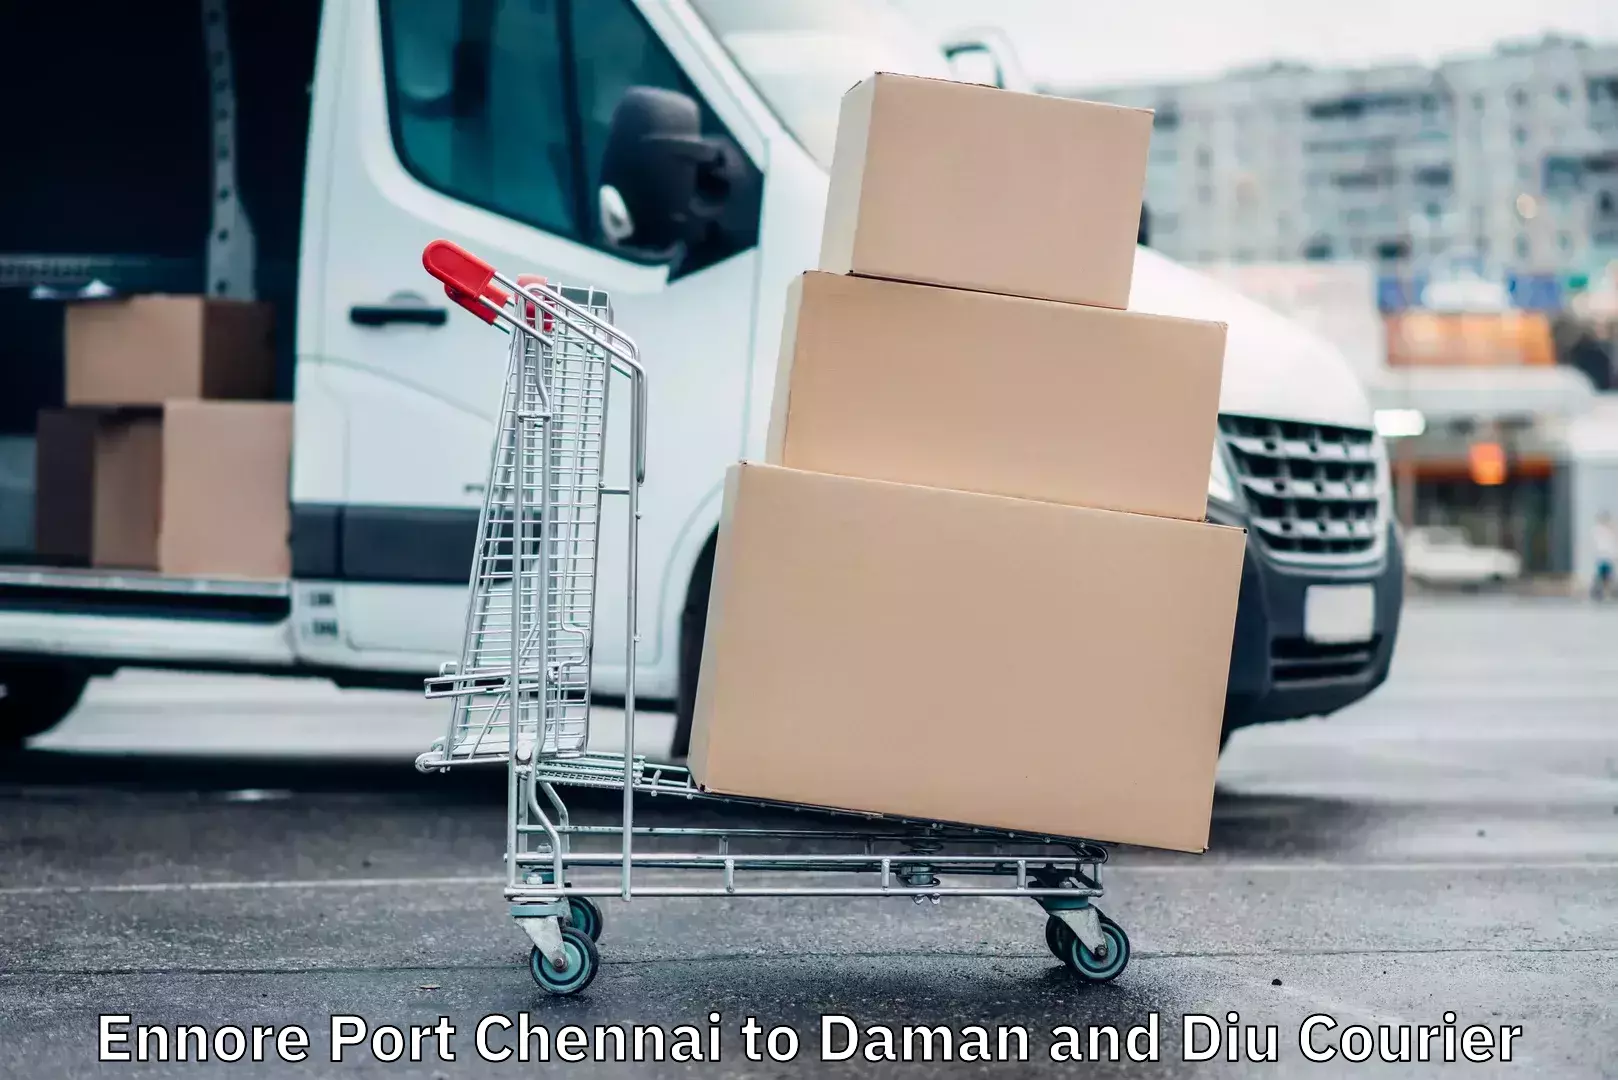 Delivery service partnership in Ennore Port Chennai to Daman and Diu